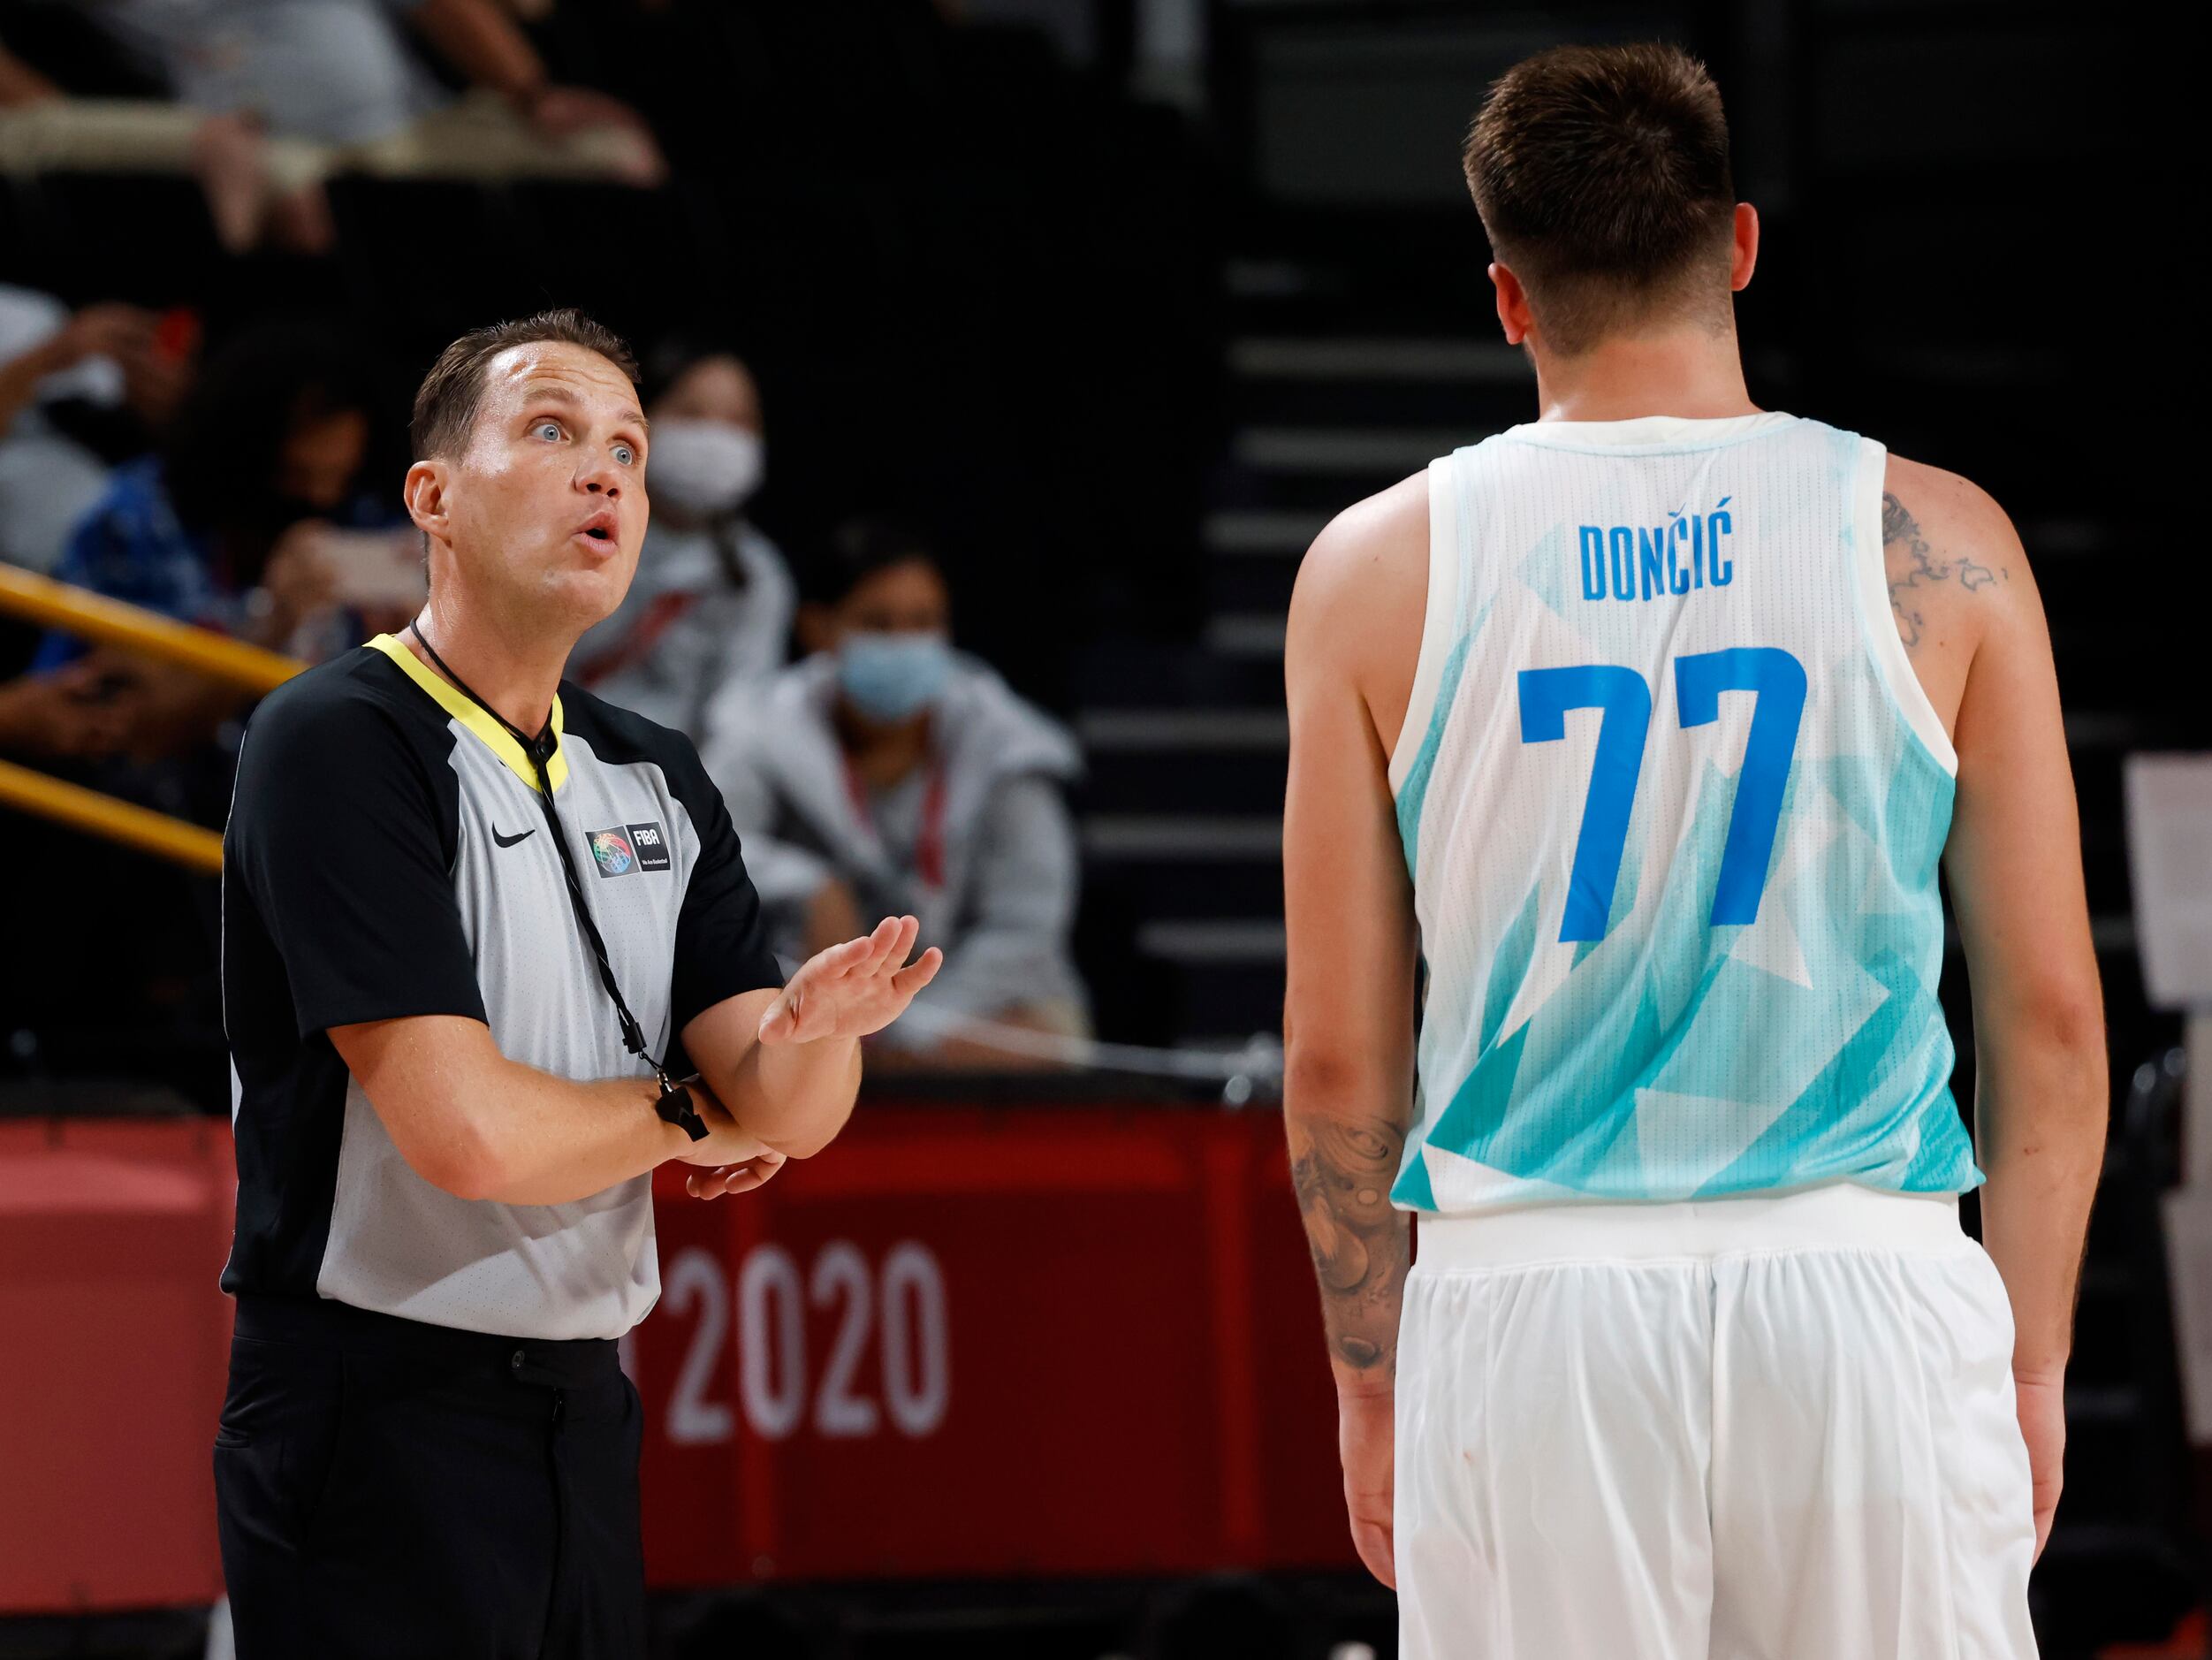 An official talks to Slovenia’s Luka Doncic in between plays in a basketball game against...